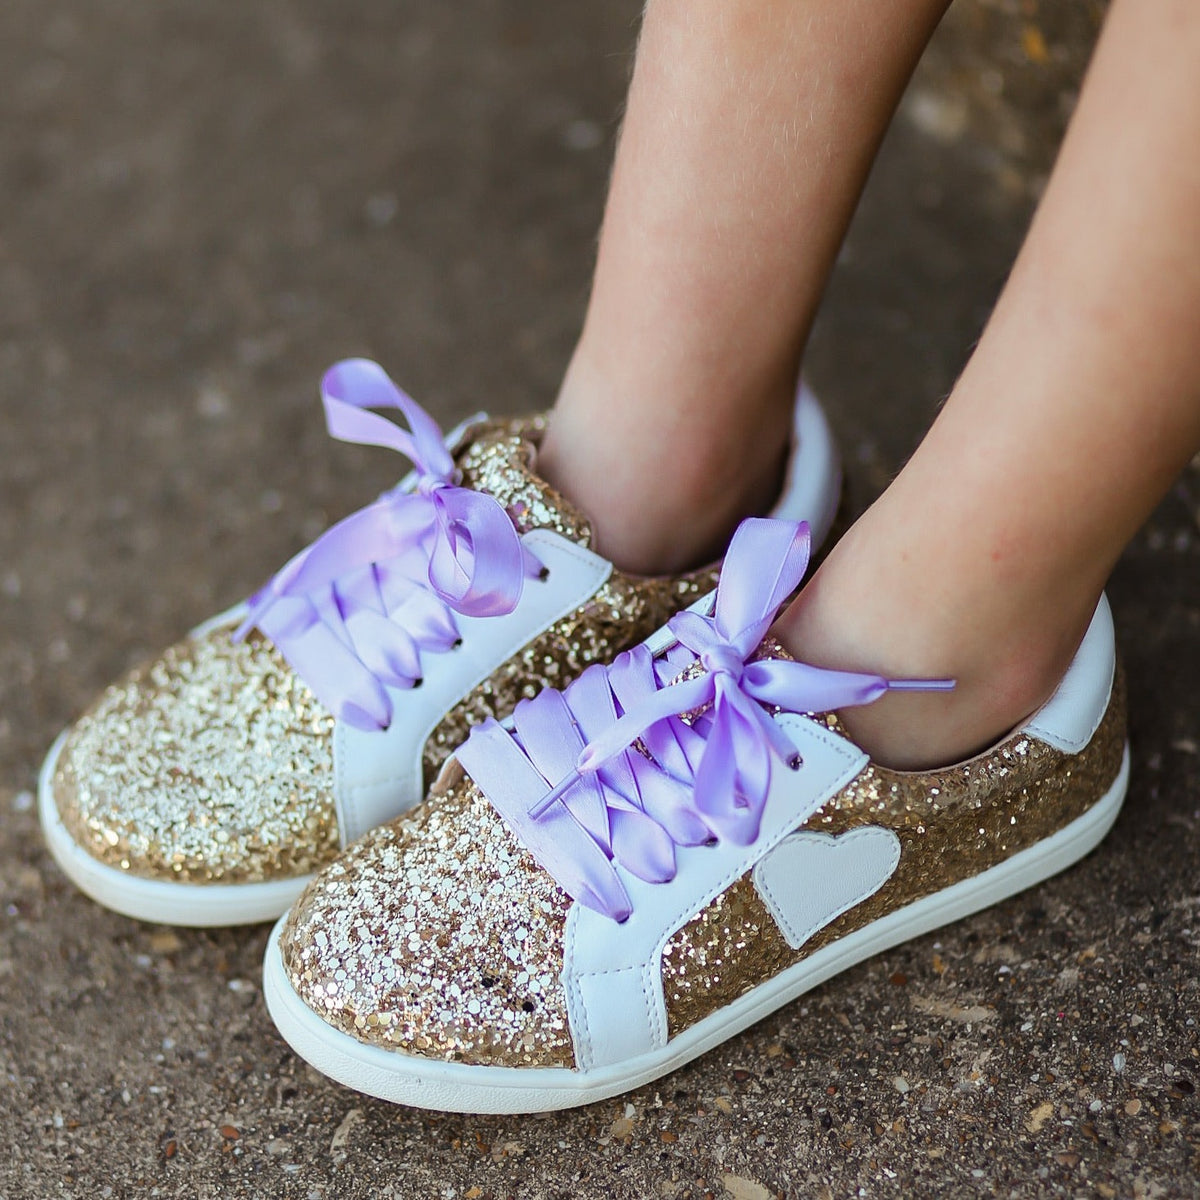 Gold Glitter Sneakers